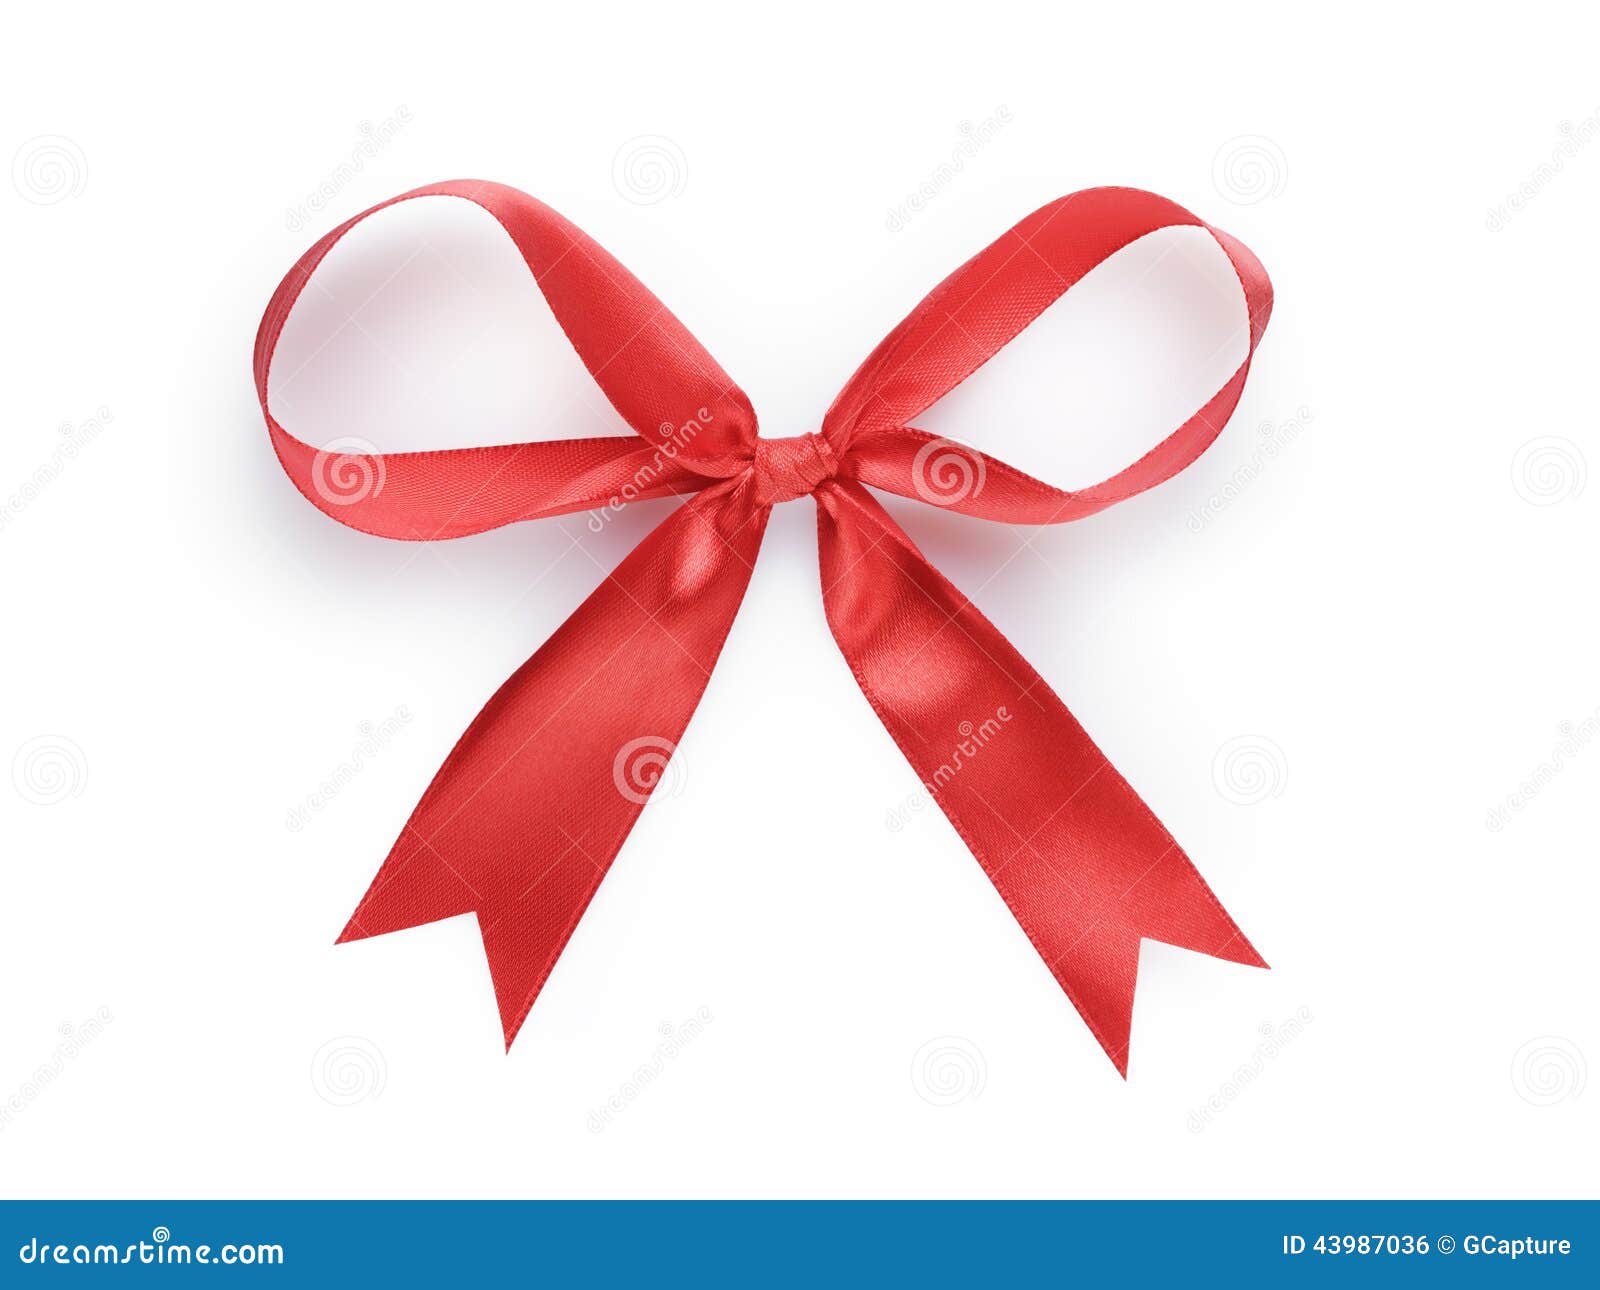 Red thin ribbon bow stock photo. Image of background - 43987036